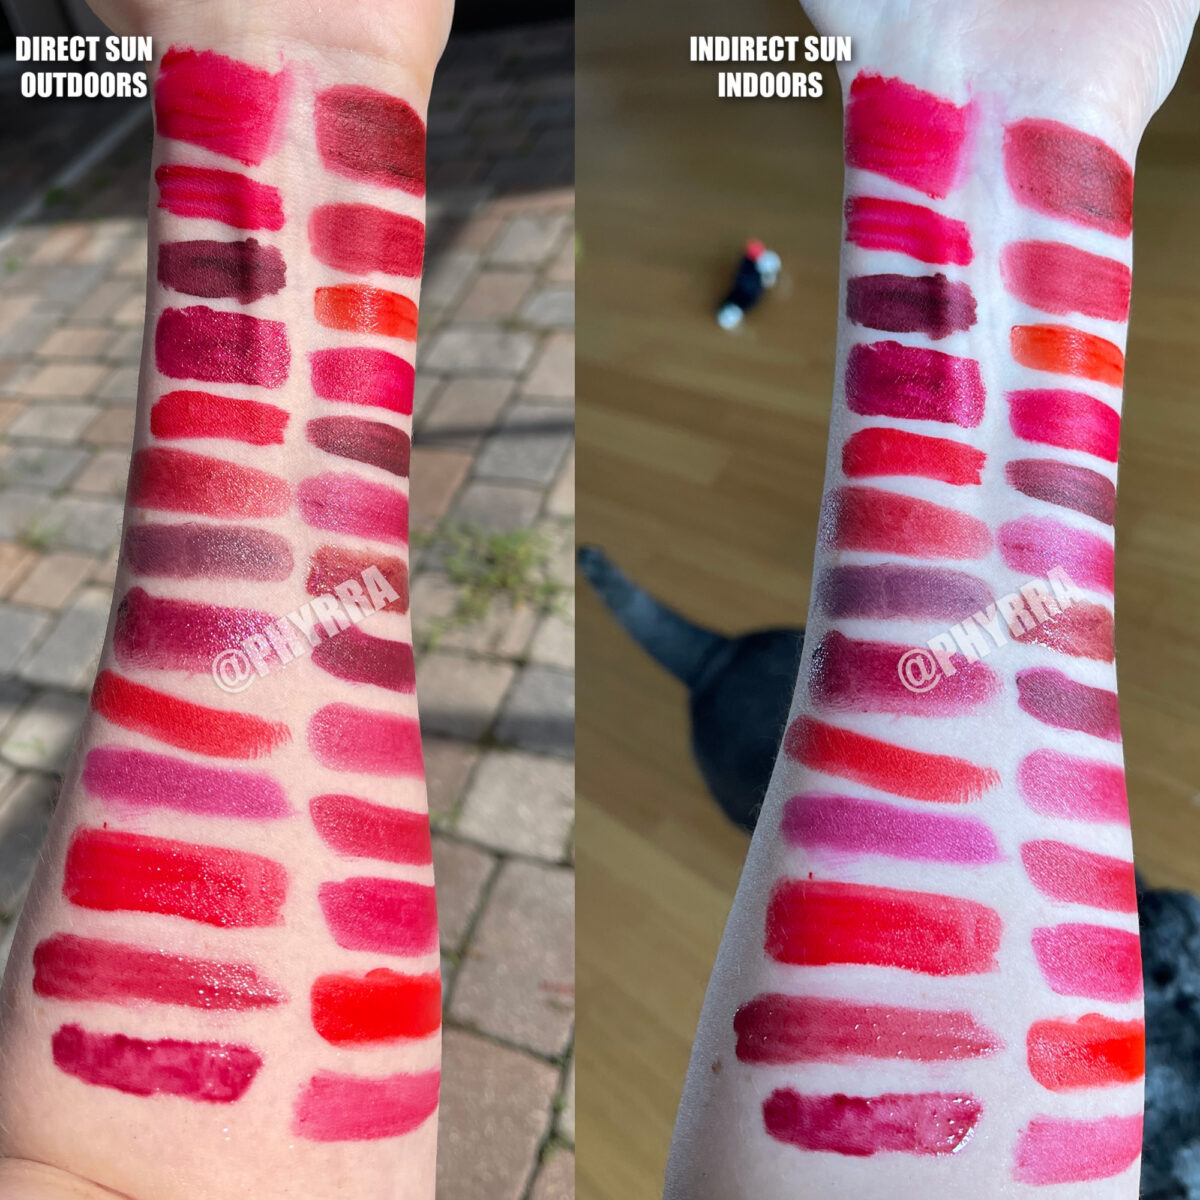 Red Goth Makeup Ideas - red lipstick swatches on fair skin